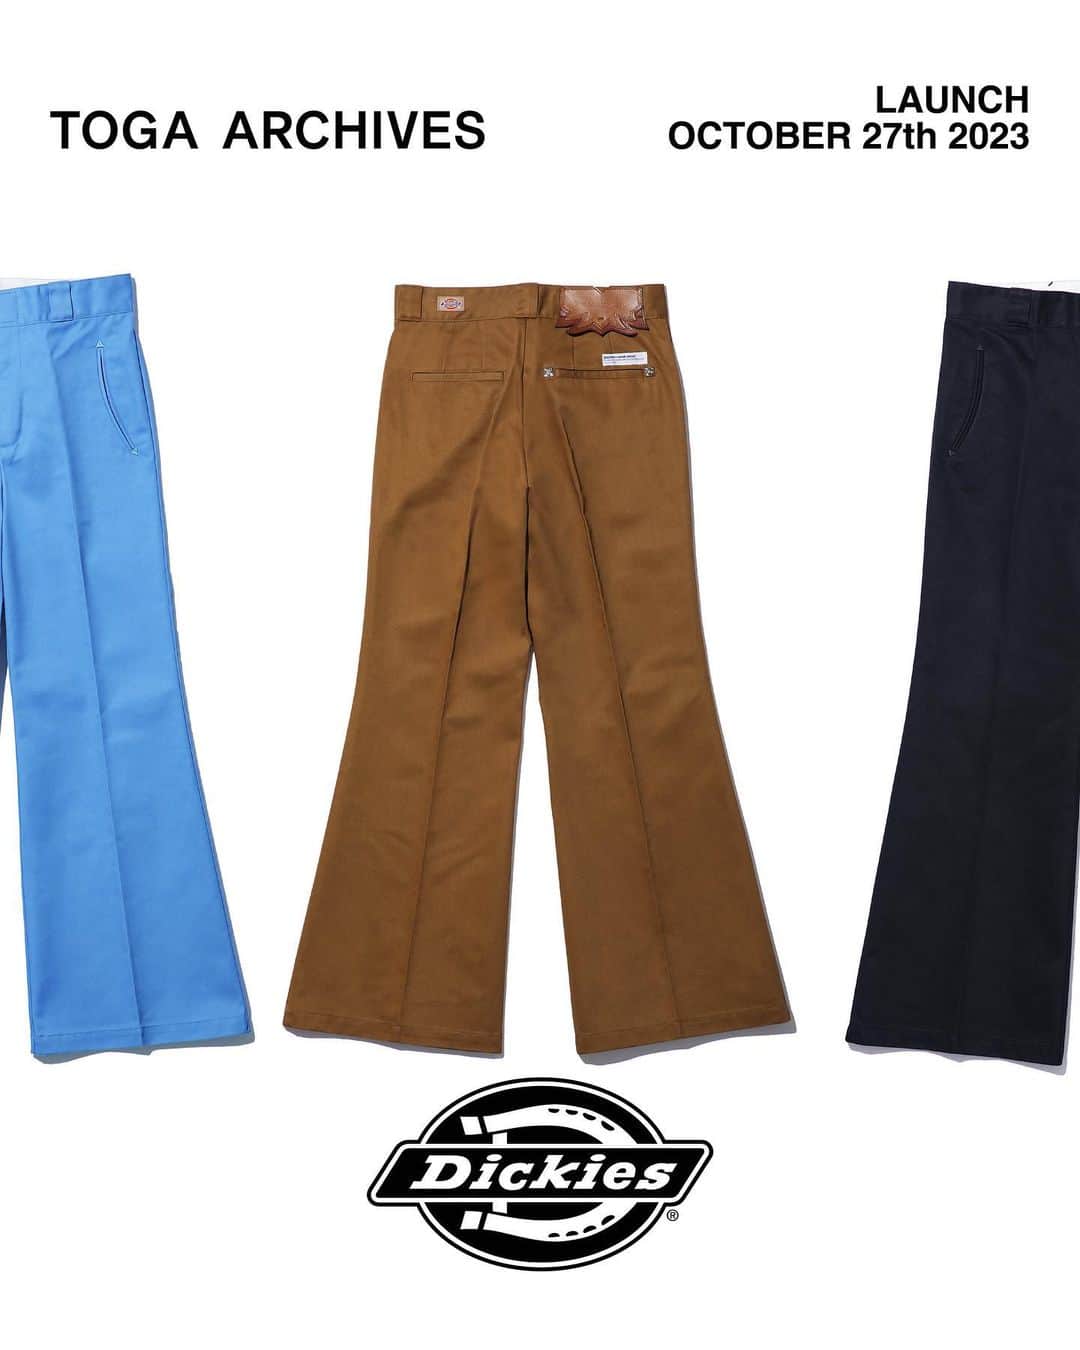 TOGAのインスタグラム：「10月27(金)11:00AMより TOGA × Dickiesを発売致します。  ※TOGA ISETAN SHINJUKU店は10月25日(水)10:00AMより店頭、並びにオンラインストアにて先行発売致します。  TOGA × Dickies collaboration will launch on Friday 27th of October 11:00AM JST.  ※Will be available at TOGA ISETAN SHINJUKU store and online store on Wednesday 25th of October 10:00AM.  【Pleats skirt Dickies】 color: brown, light blue, black size: XS,S,M price: 39,600 yen (36,000 before-tax)  【Flare pants Dickies】 color: brown, light blue, black size: XS, S, M, L, XL price: 33,000 yen (30,000 before-tax)  【Jumpsuit Dickies SP】 color: brown, green, black size: S, M, L, XL price: 64,900 yen (59,000 before-tax)  【Work blouson Dickies】 color: brown, light blue, black size: S, M, L, XL price: 53,900 yen (49,000 before-tax)  【STORES】 TOGA HARAJUKU TOGA SHIBUYA PARCO TOGA ISETAN SHINJUKU*10/25(Fri) store and online. TOGA OSAKA TOGA HANKYU UMEDA  TOGA KANAZAWA TOGA ONLINE STORE TOGA RAKUTEN FASHION  @togaarchives_online https://store.toga.jp/  @dickies_jp   #toga #togaarchives #dickies」